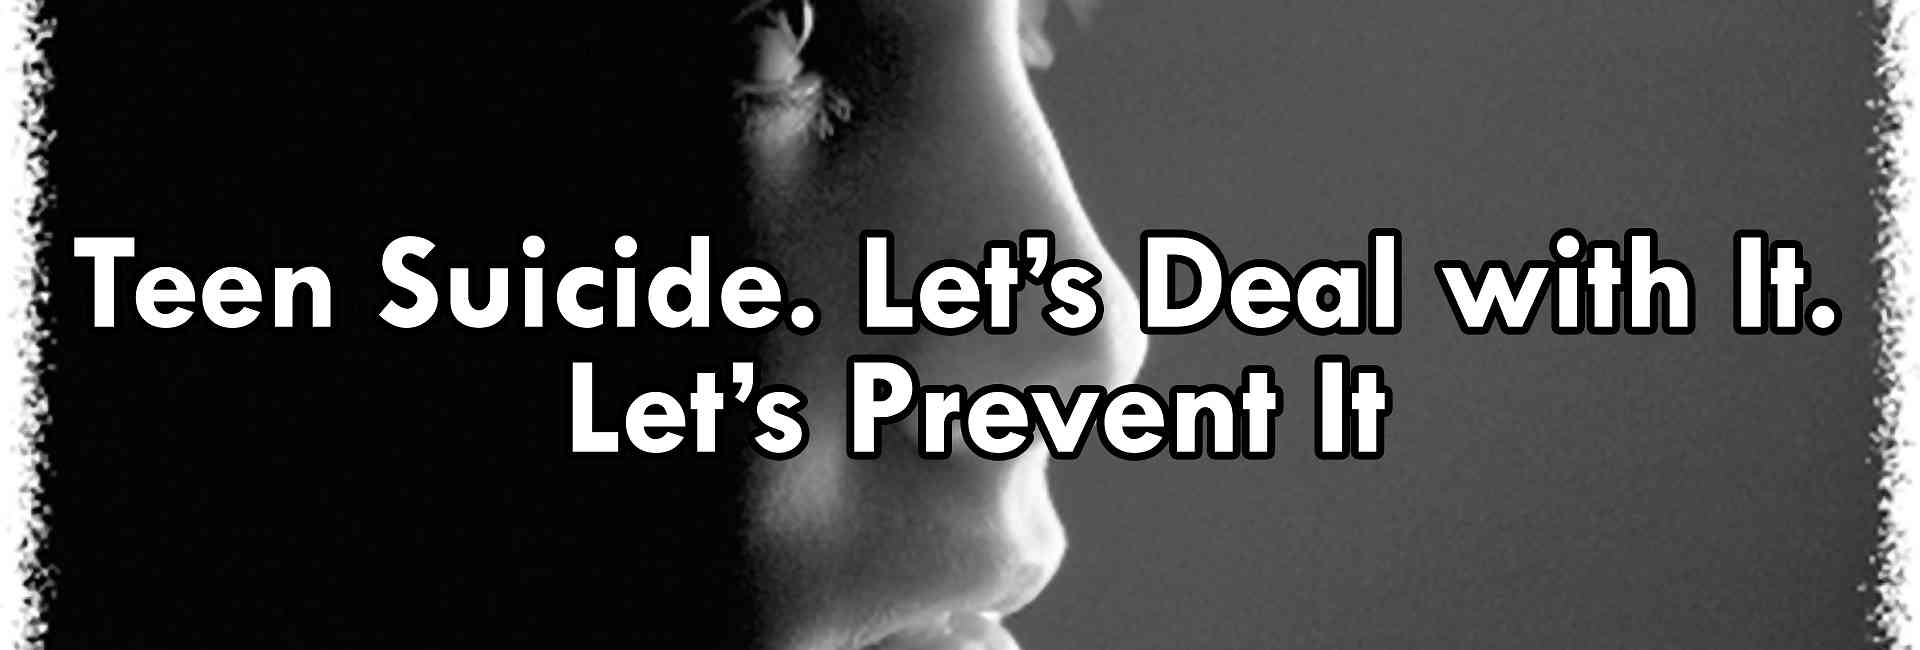 Teen Suicide. Let's Deal with It. Let's Prevent It